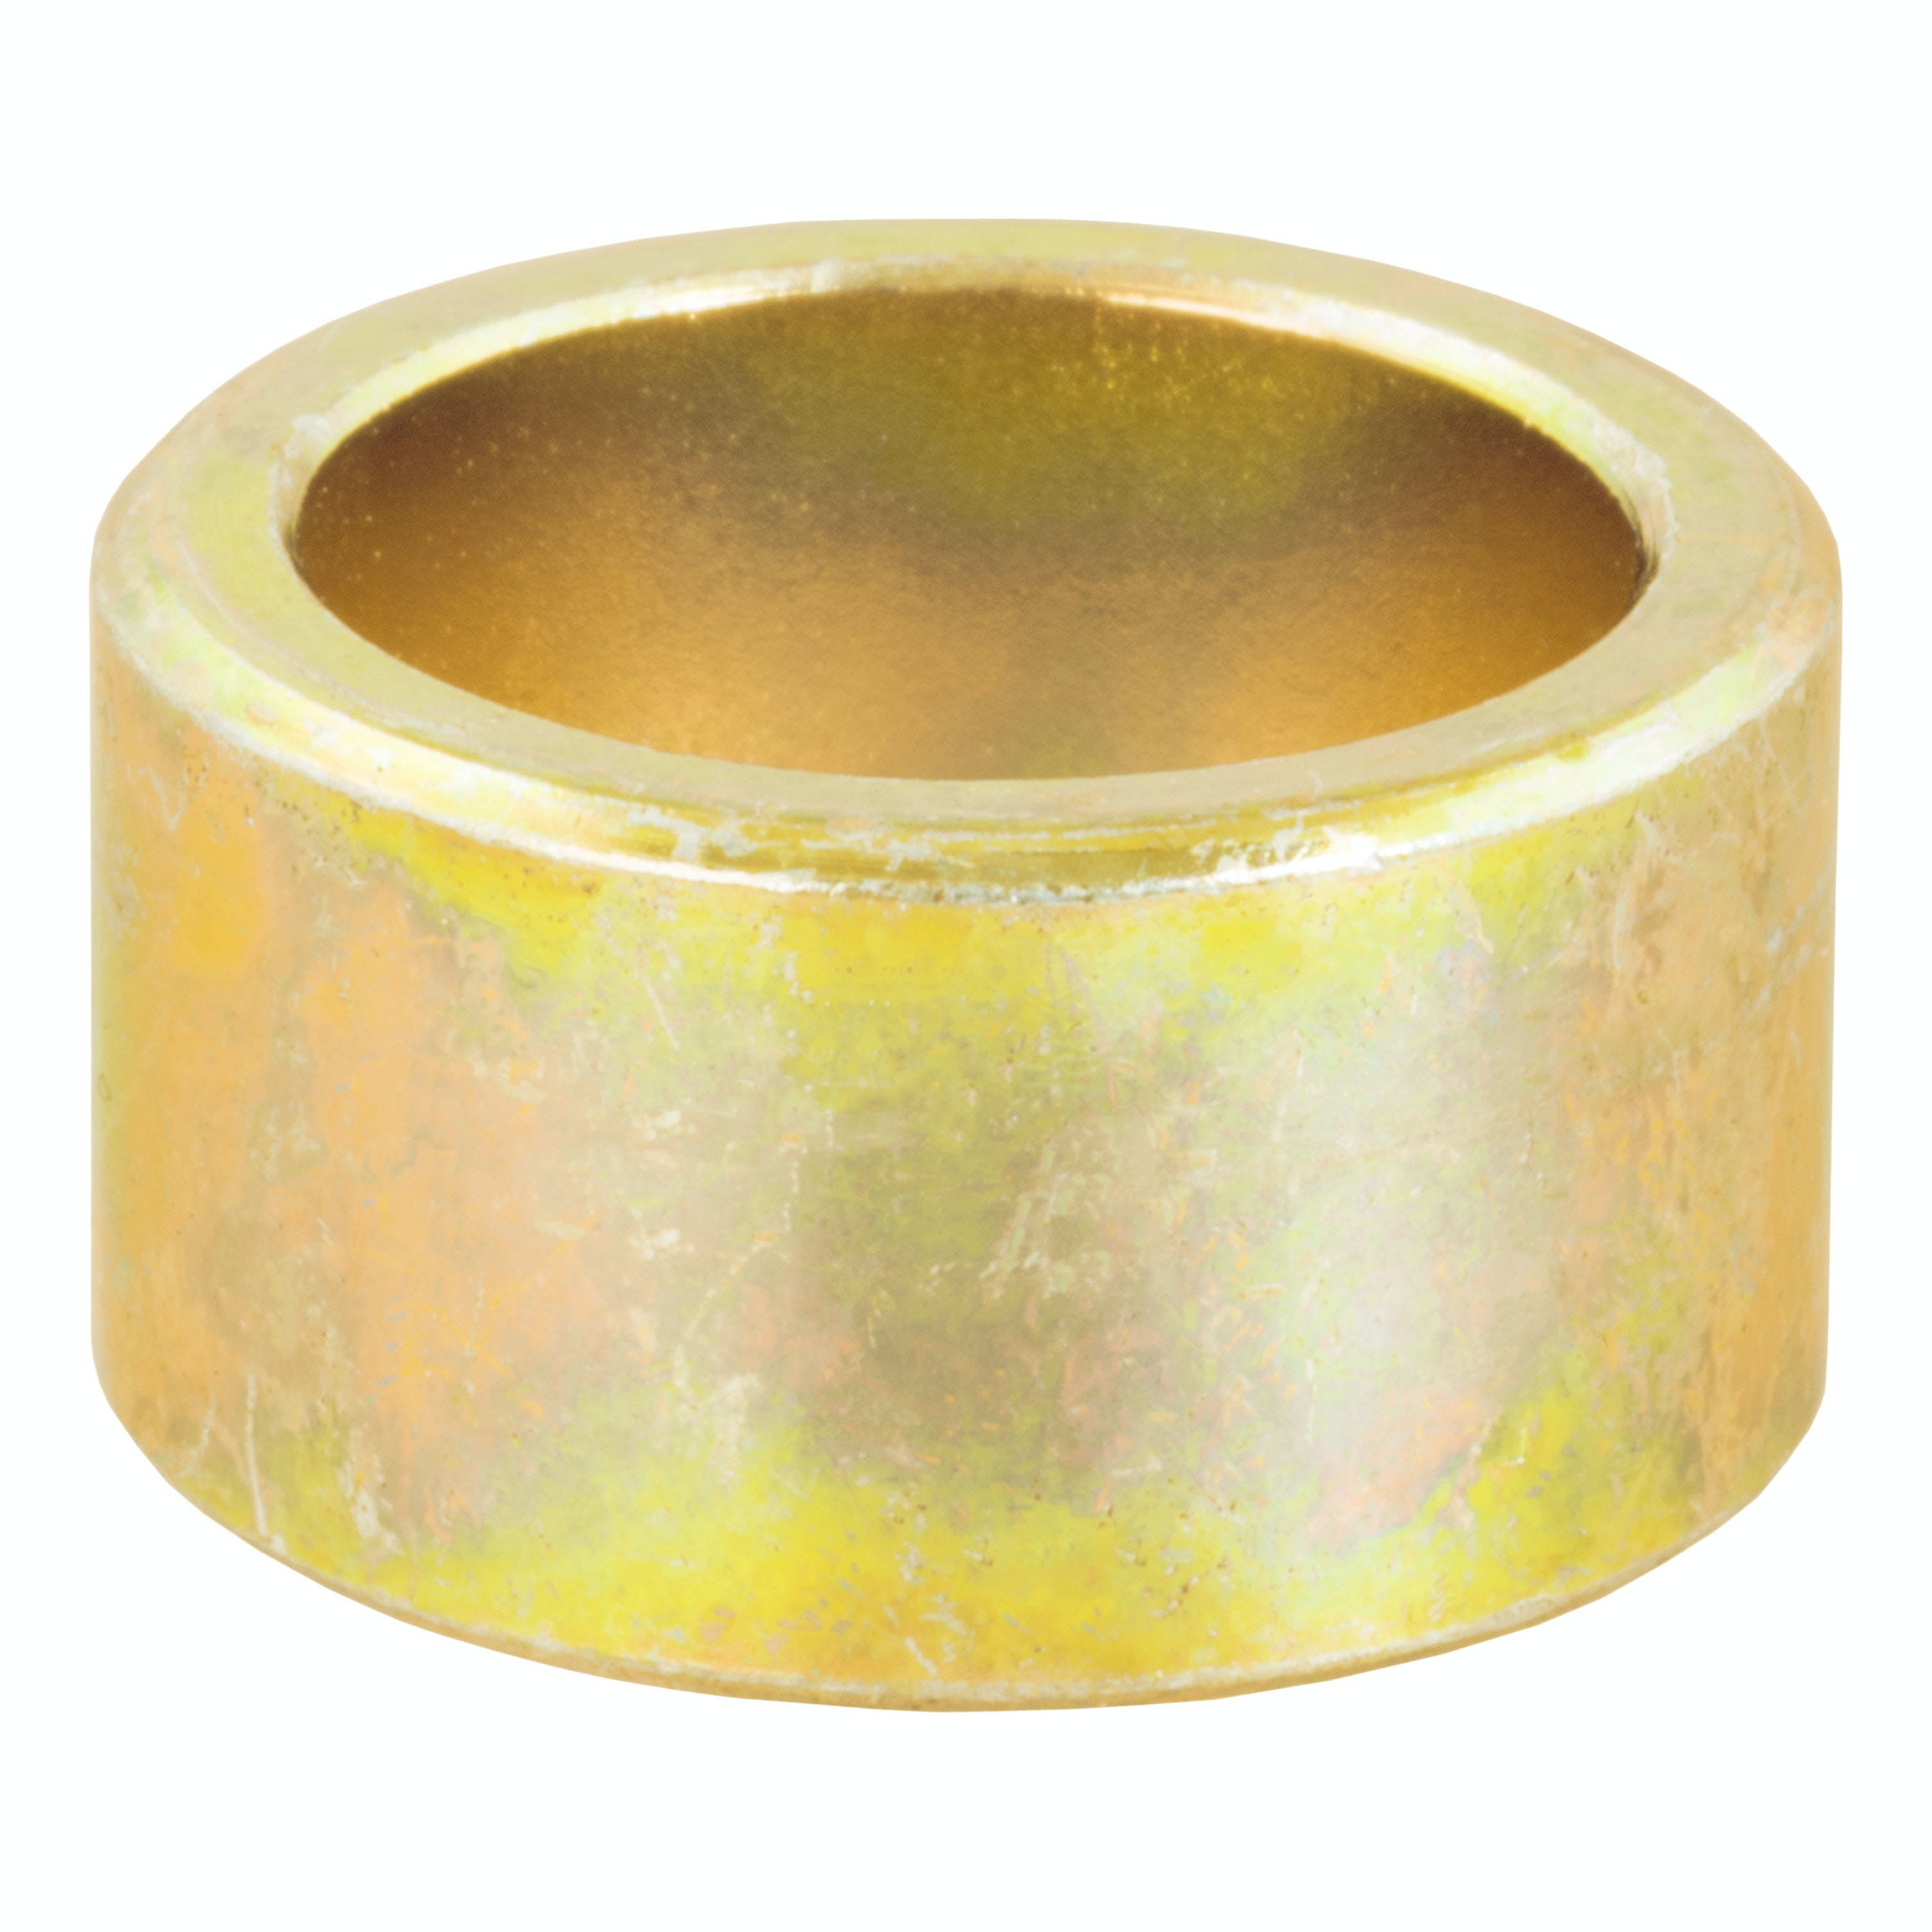 CURT 21101 Trailer Ball Reducer Bushing (From 1 to 3/4 Stem, Packaged)